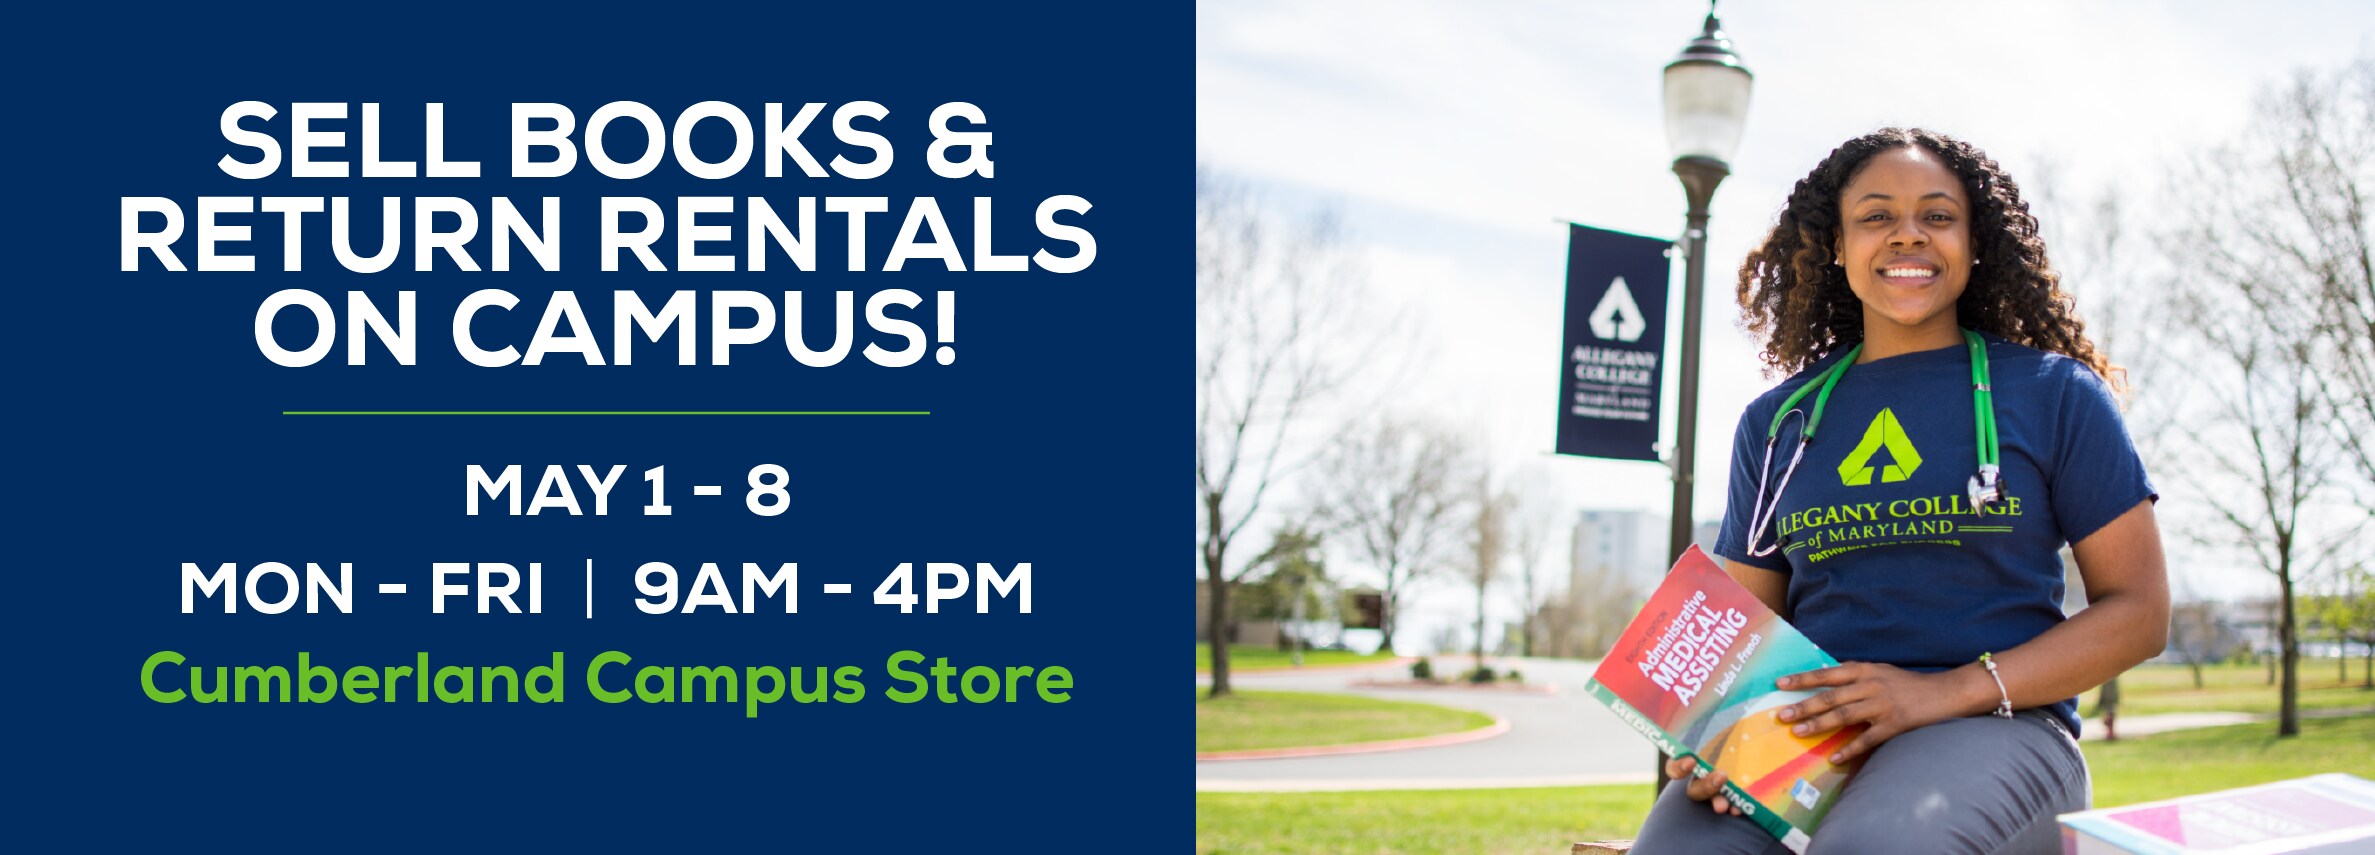 Sell books and return rentals on campus! May 1 - 8. Monday through Friday from 9am to 4pm. Cumberland Campus Store